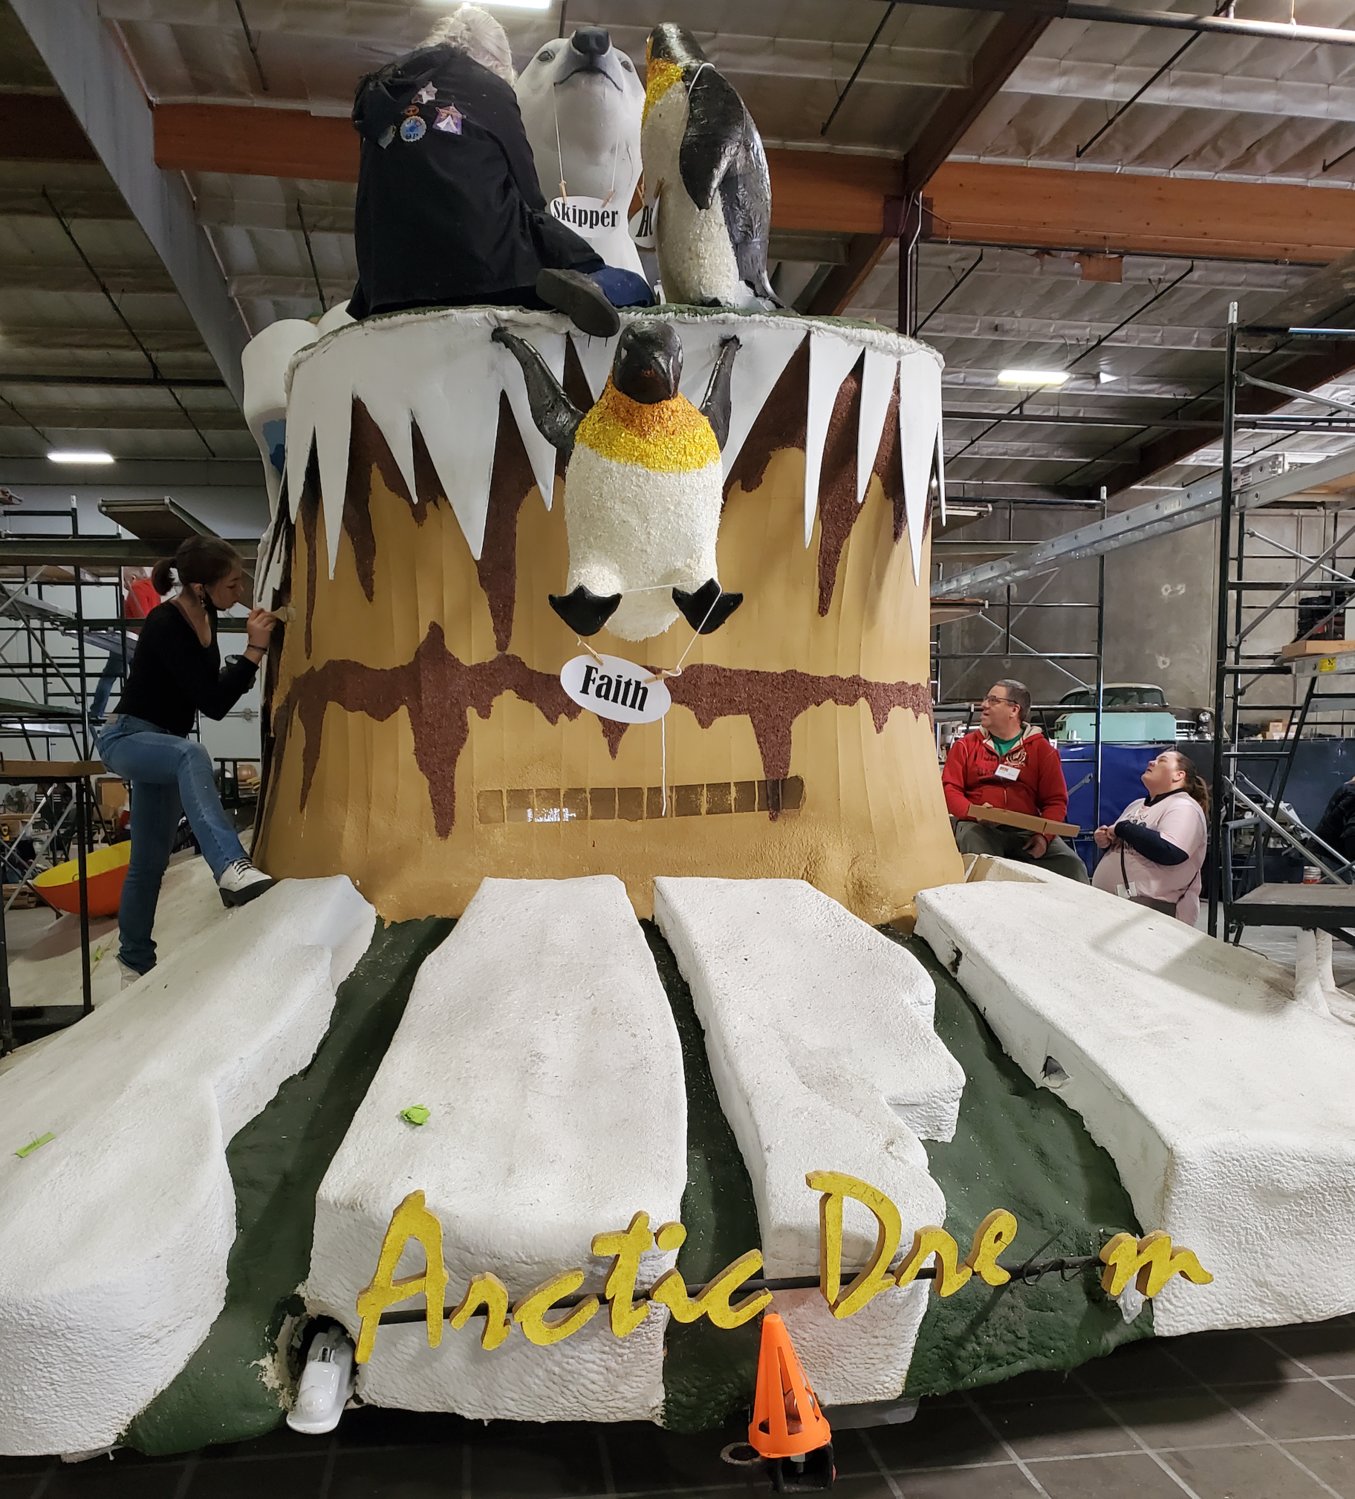 "Arctic Dreams," the Independent Order of Odd Fellows' float in Saturday's Tournament of Roses parade.